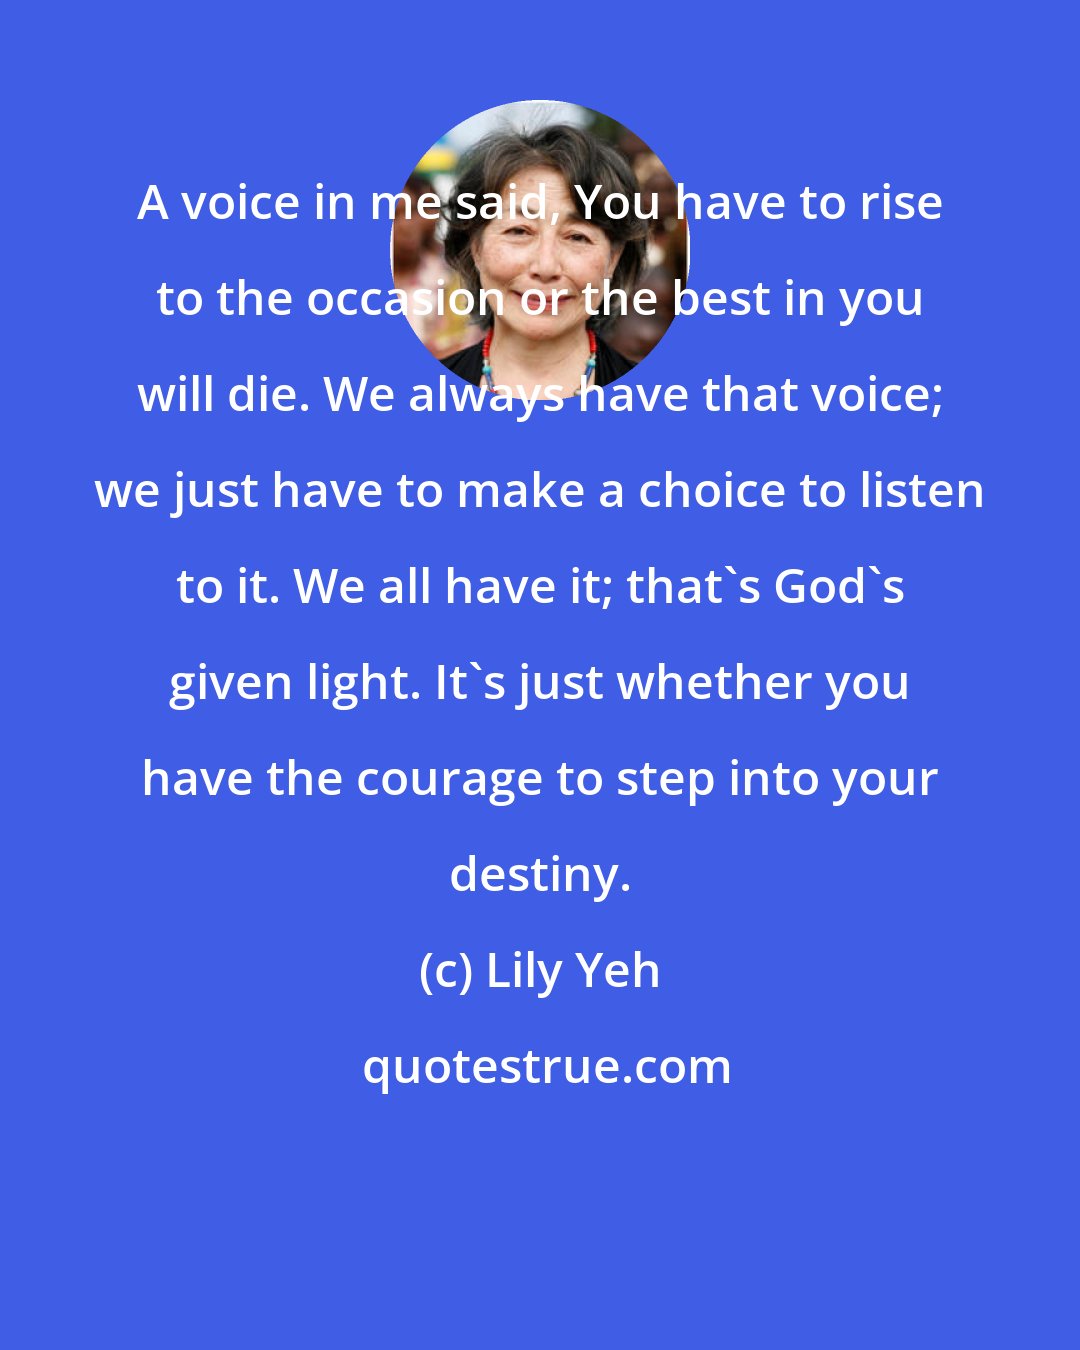 Lily Yeh: A voice in me said, You have to rise to the occasion or the best in you will die. We always have that voice; we just have to make a choice to listen to it. We all have it; that's God's given light. It's just whether you have the courage to step into your destiny.